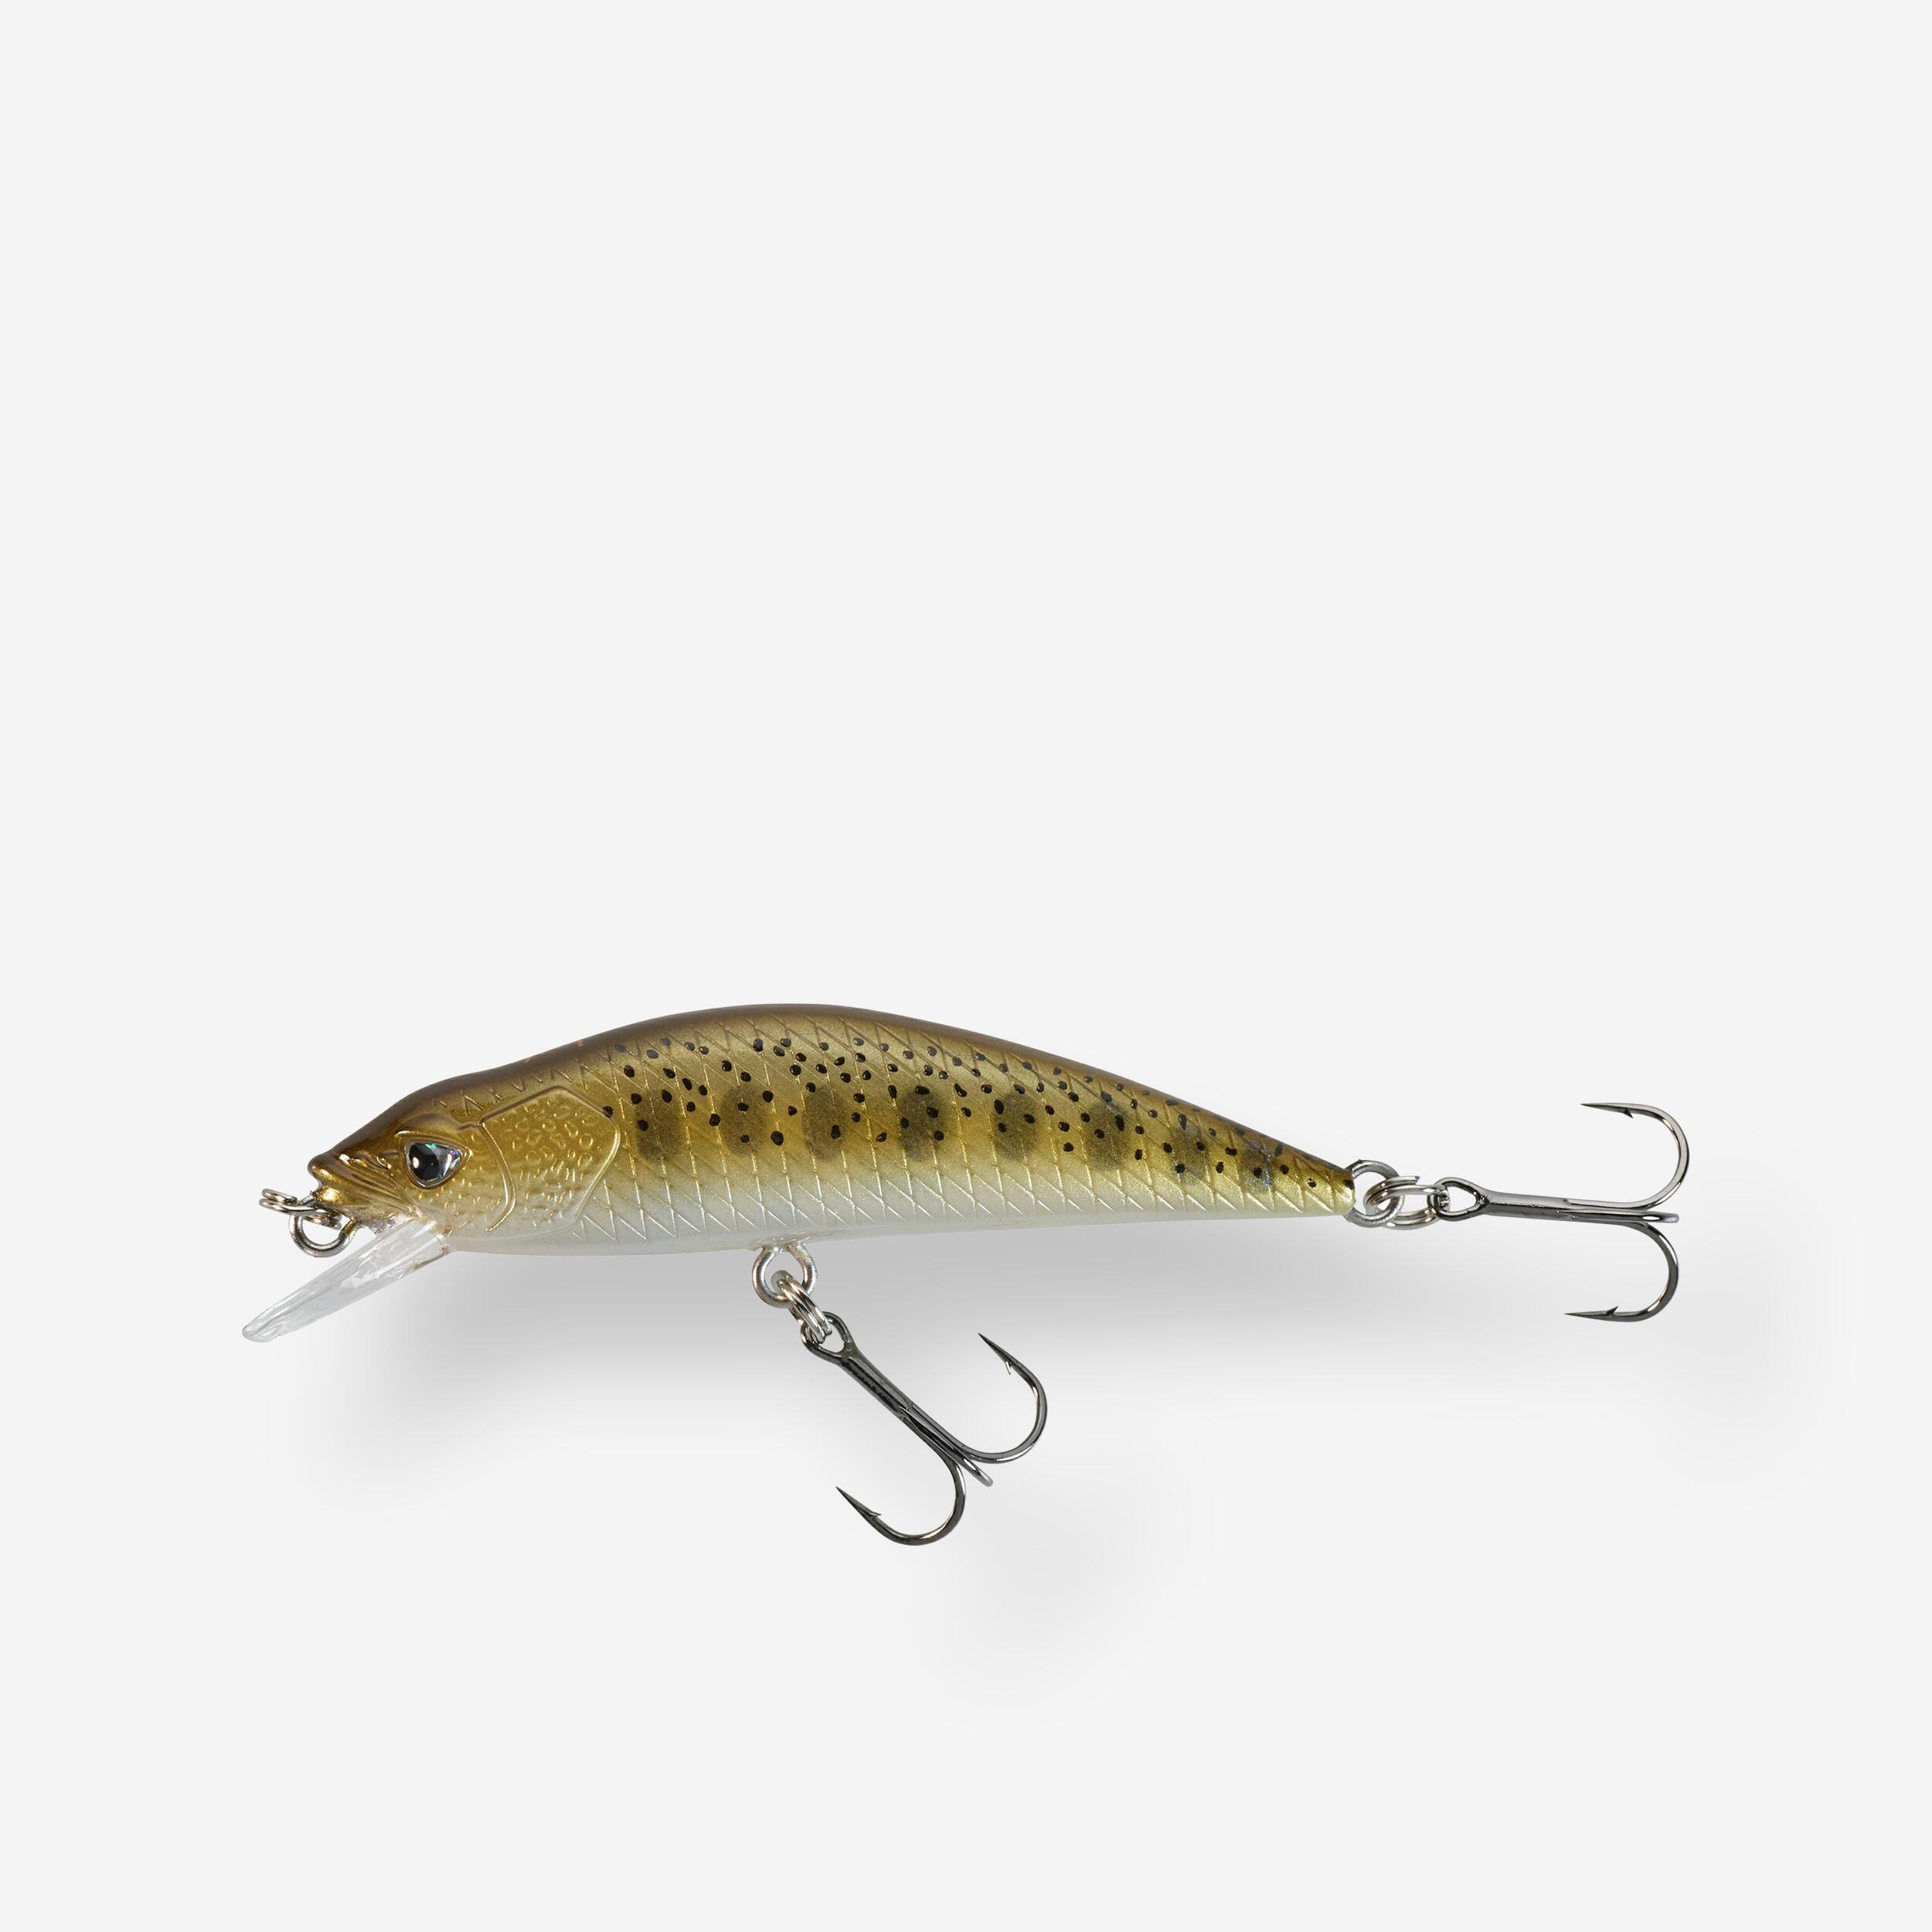 MINNOW HARD LURE FOR TROUT WXM  MNWFS 50 US YAMAME - BROWN 1/4